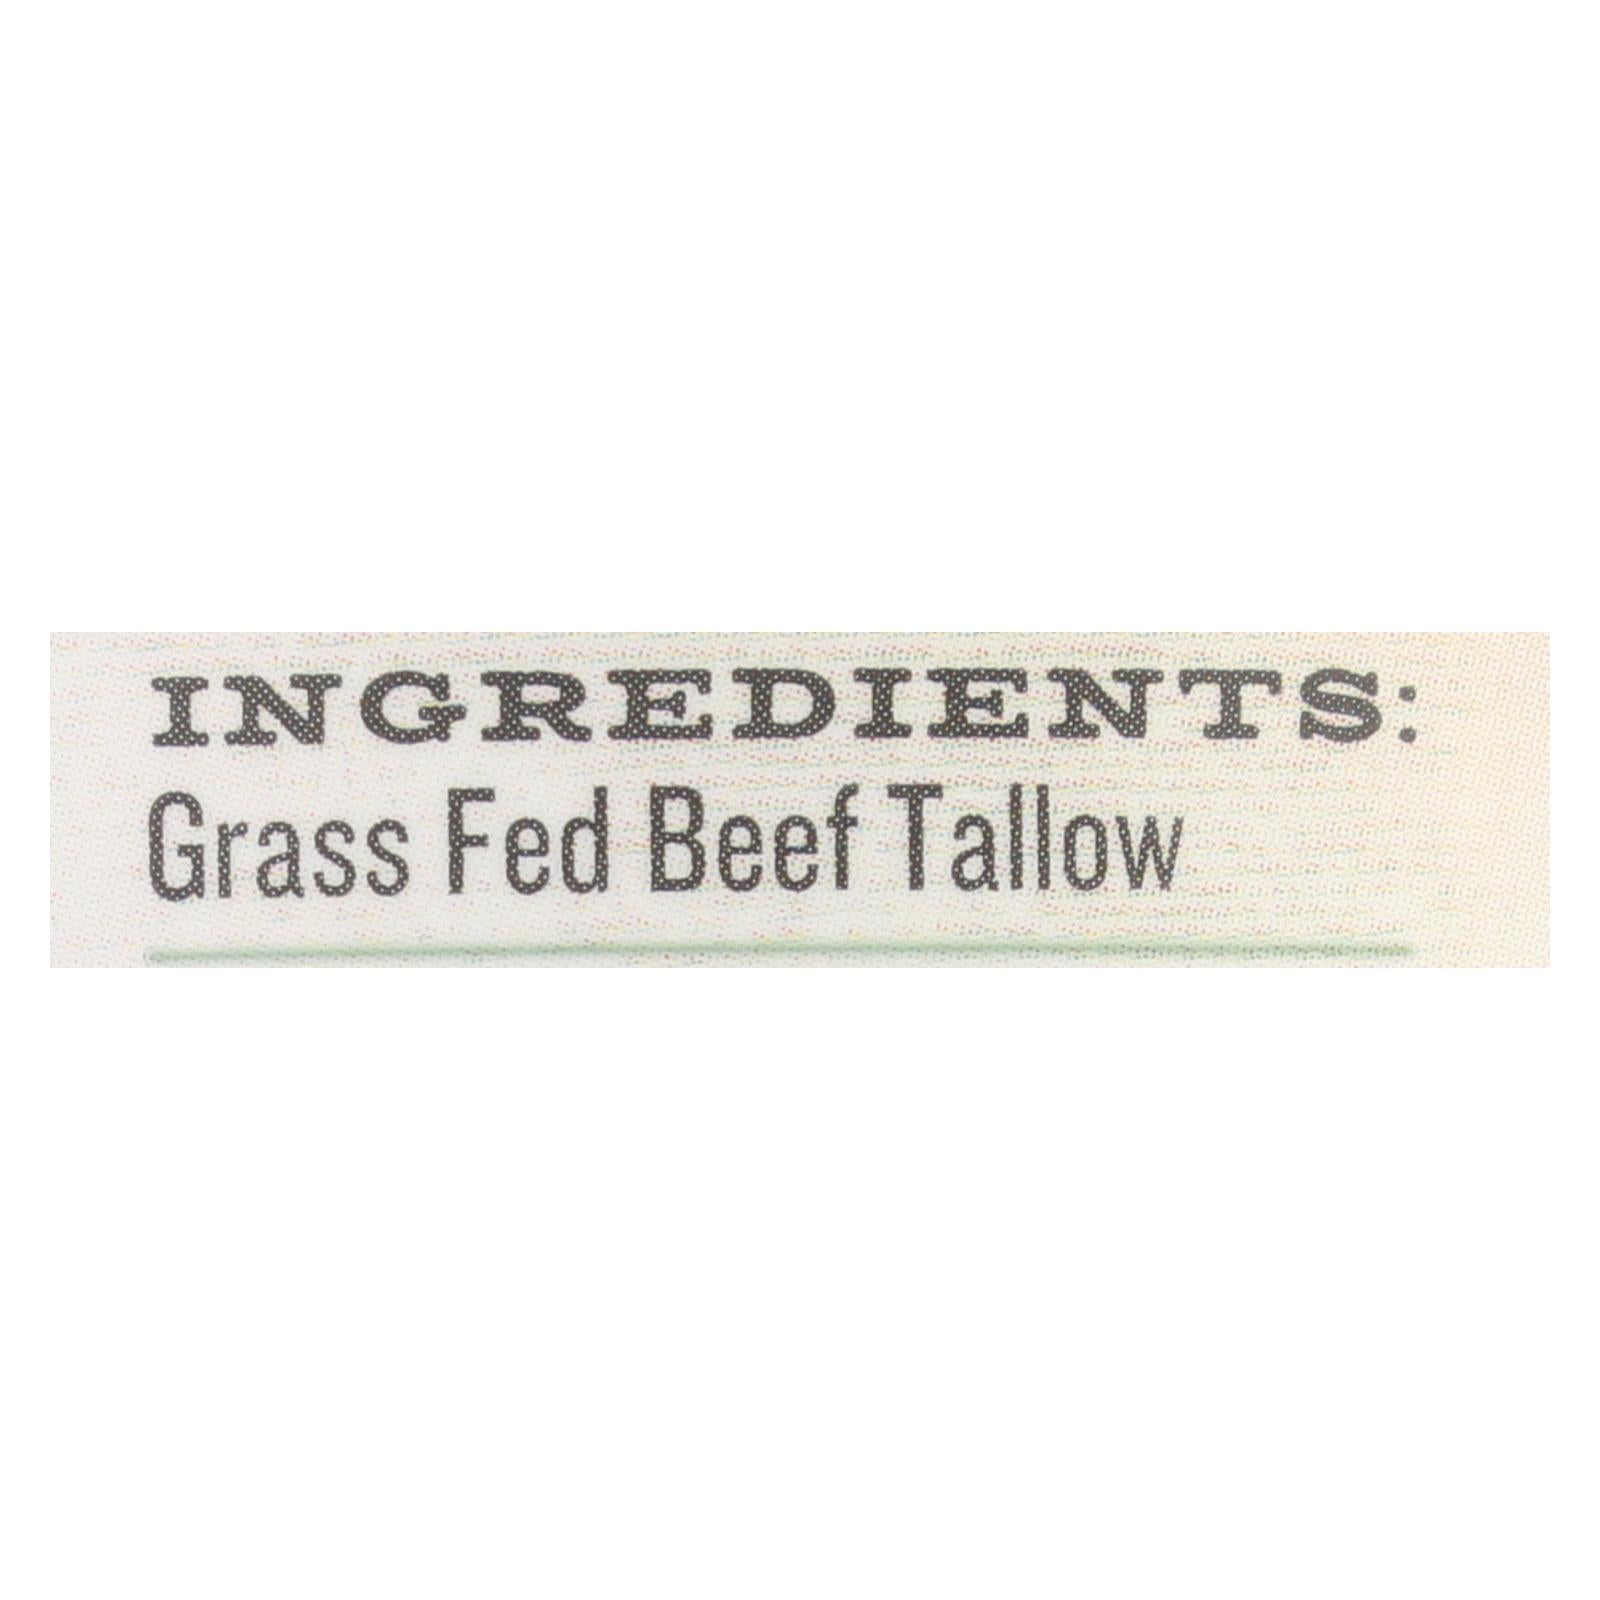 Epic - Oil Beef Tallow - Case Of 6 - 11 Oz